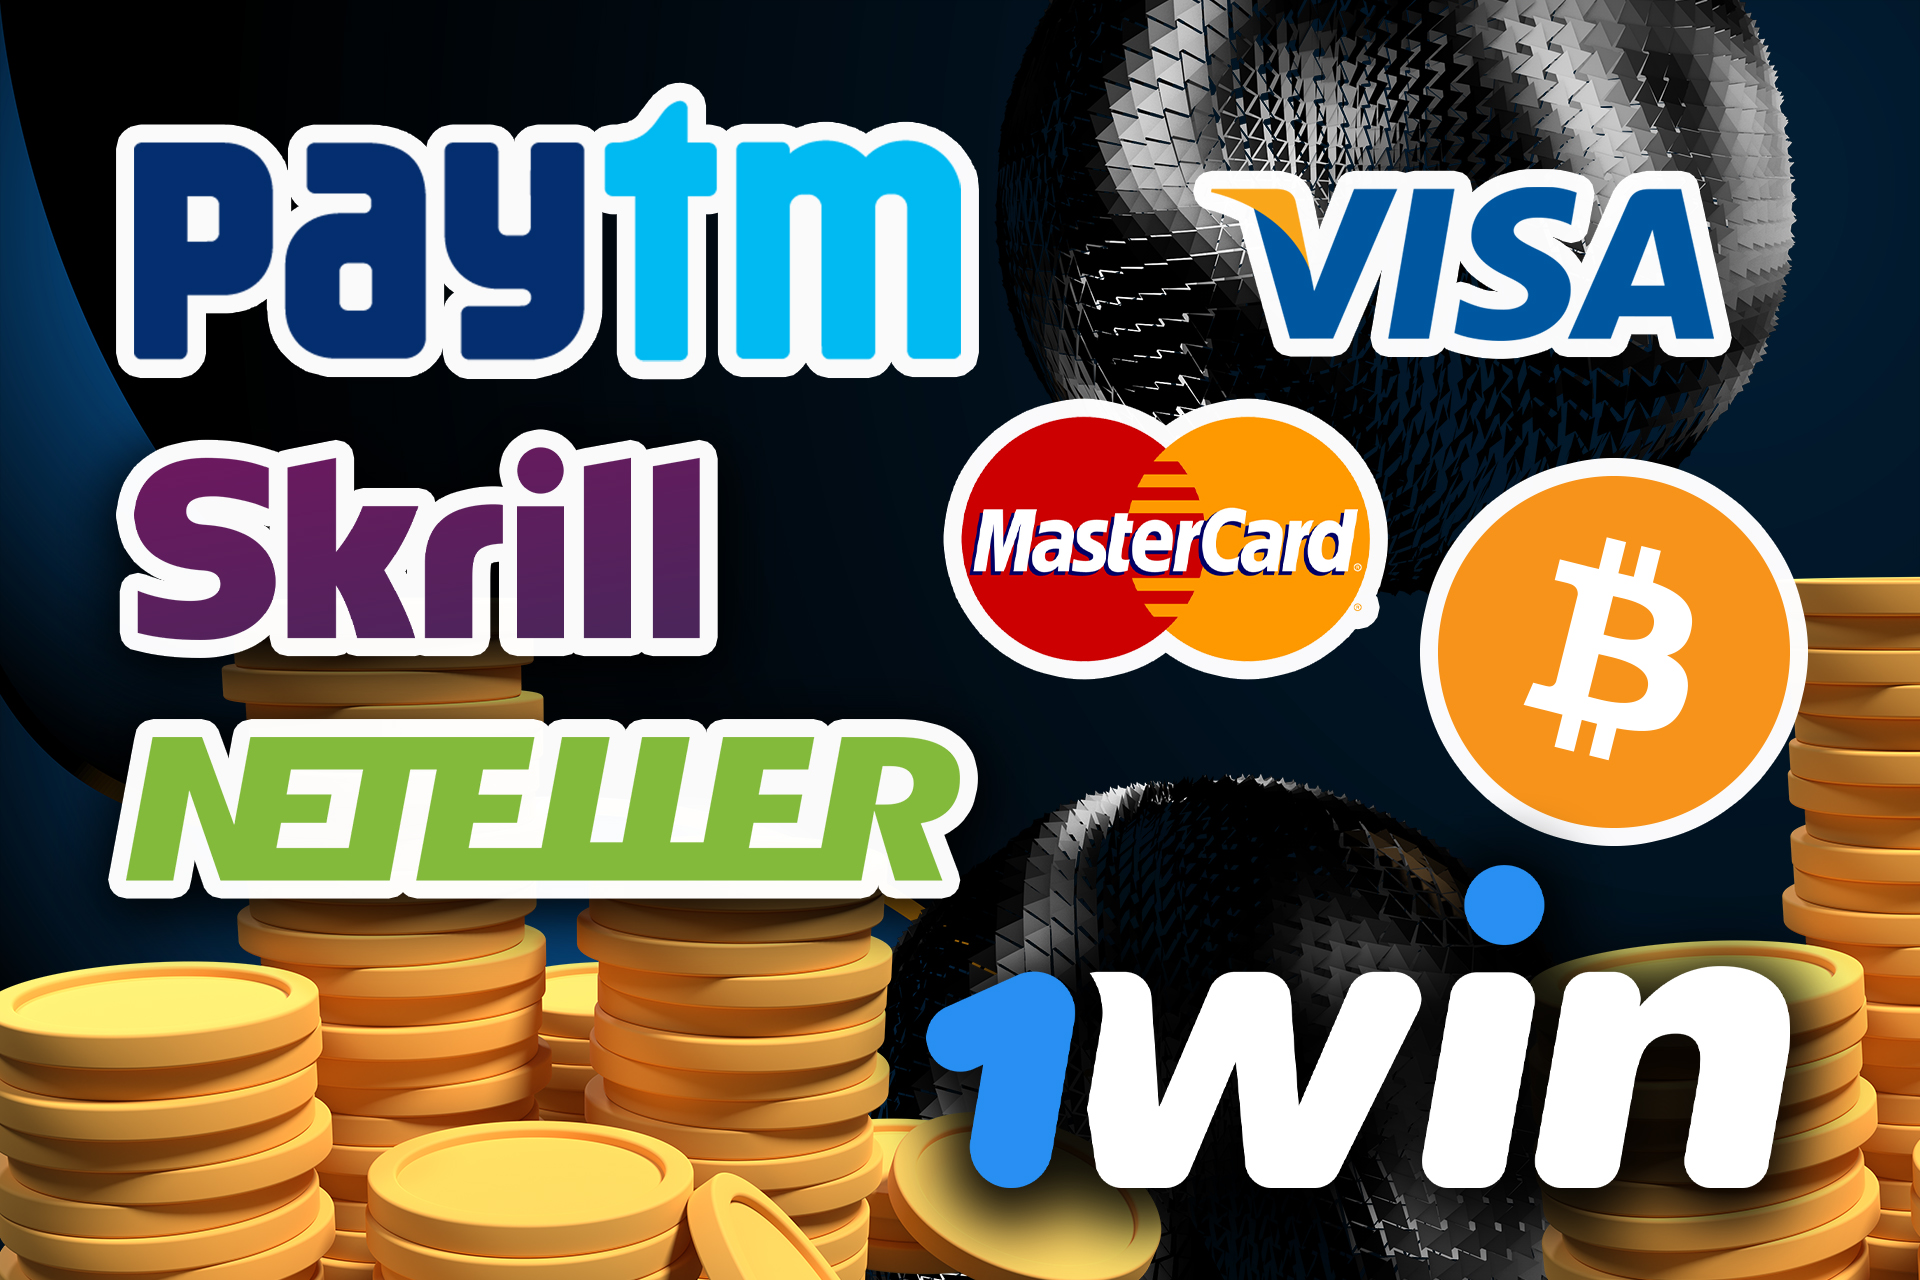 Choose one of these payment methods to top up yout Lucky Jet account.